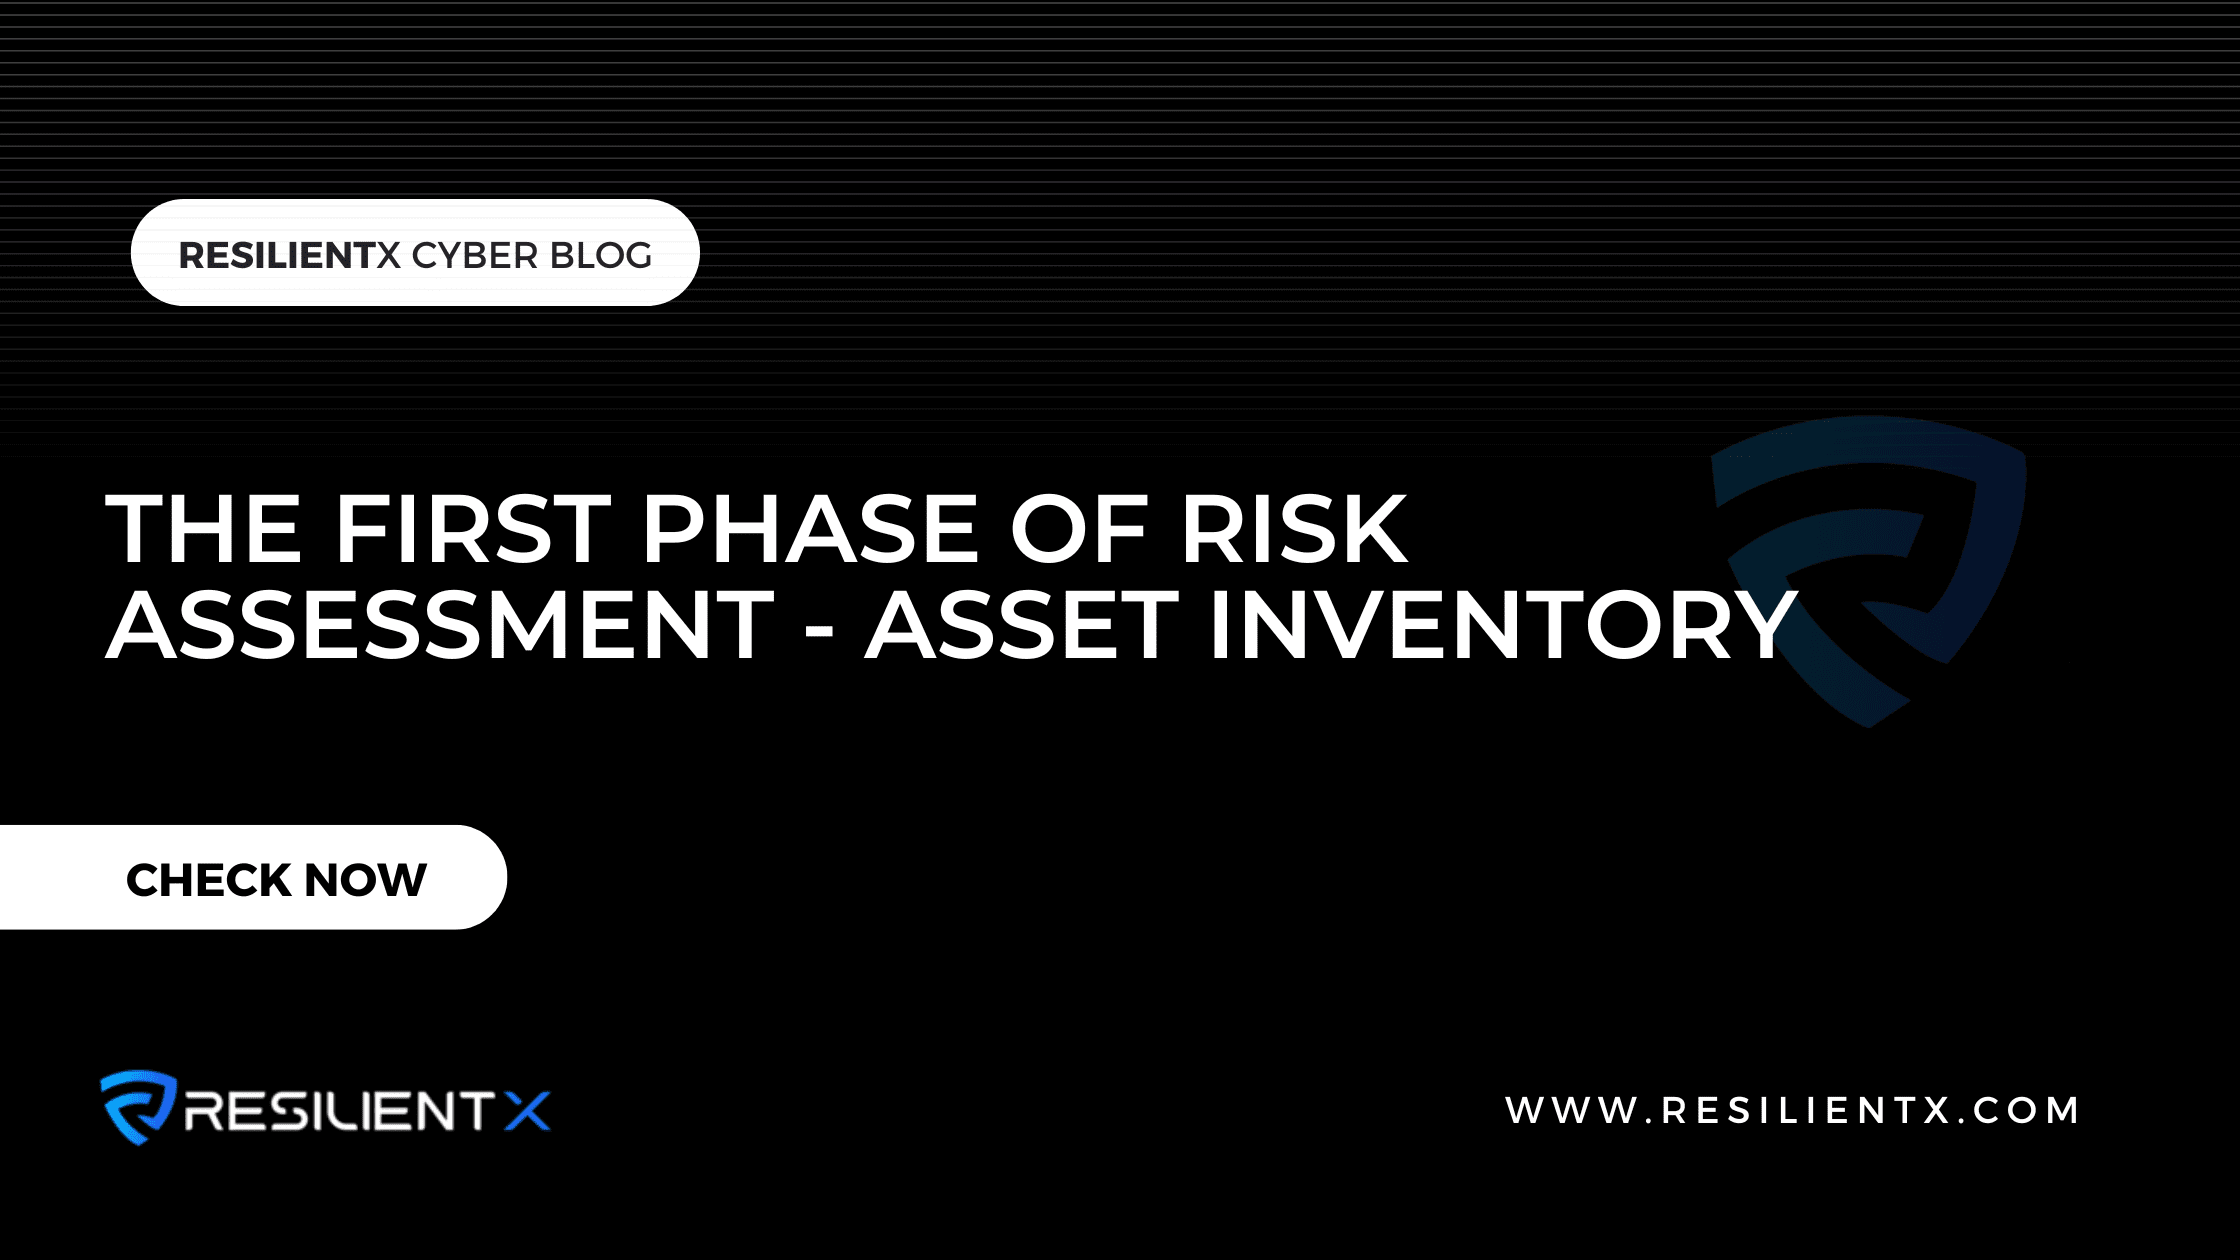 ResilientX Blog - The first phase of risk assessment - Asset inventory